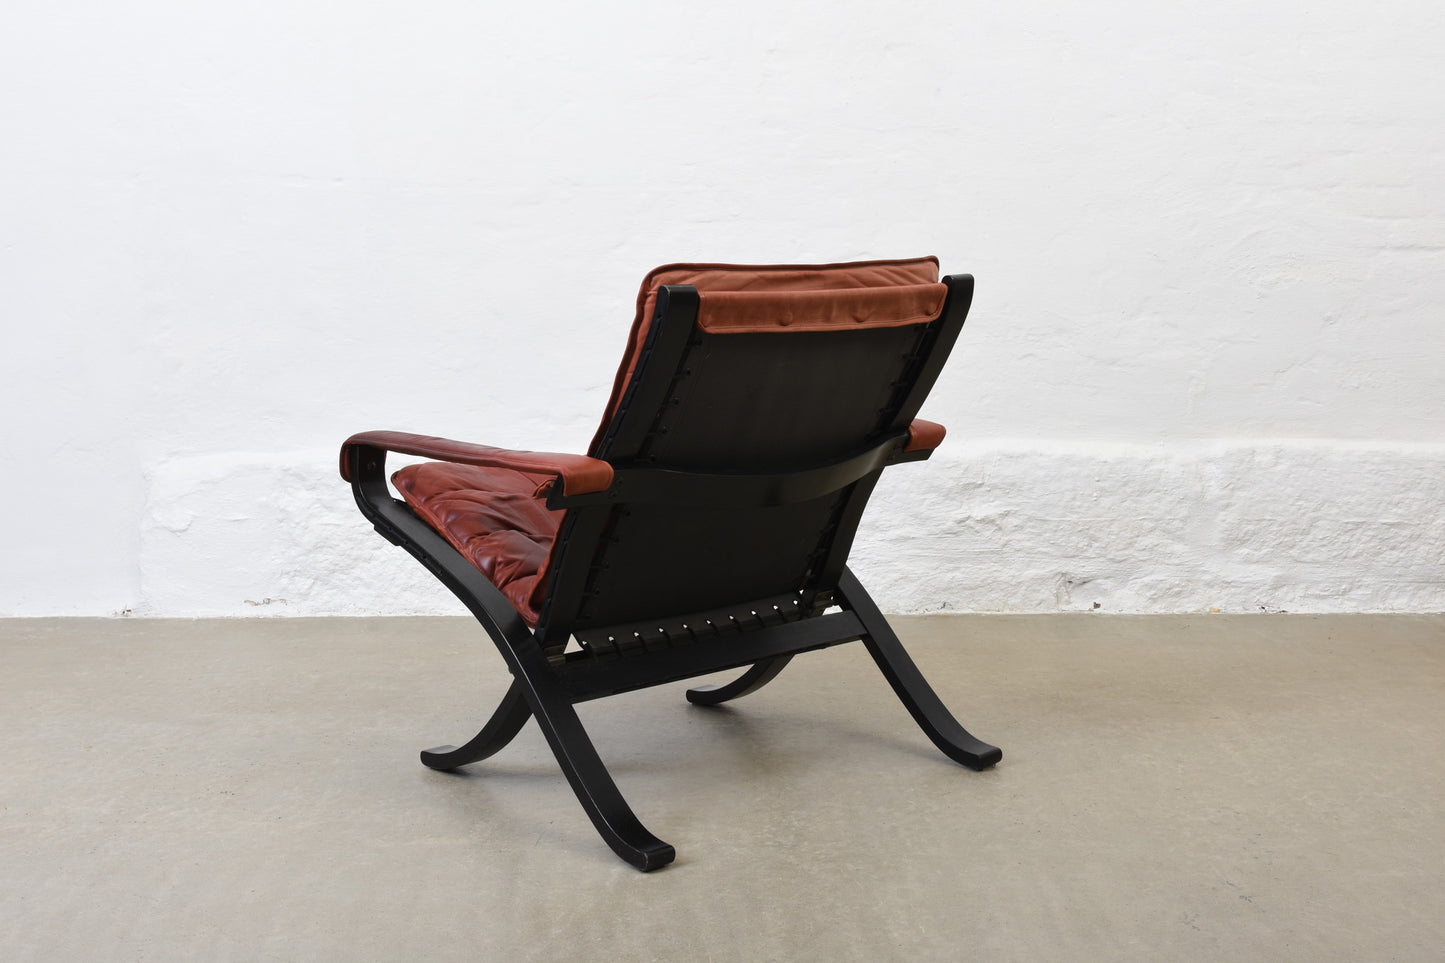 1970s beech + leather lounger by Ingmar Relling - Low back